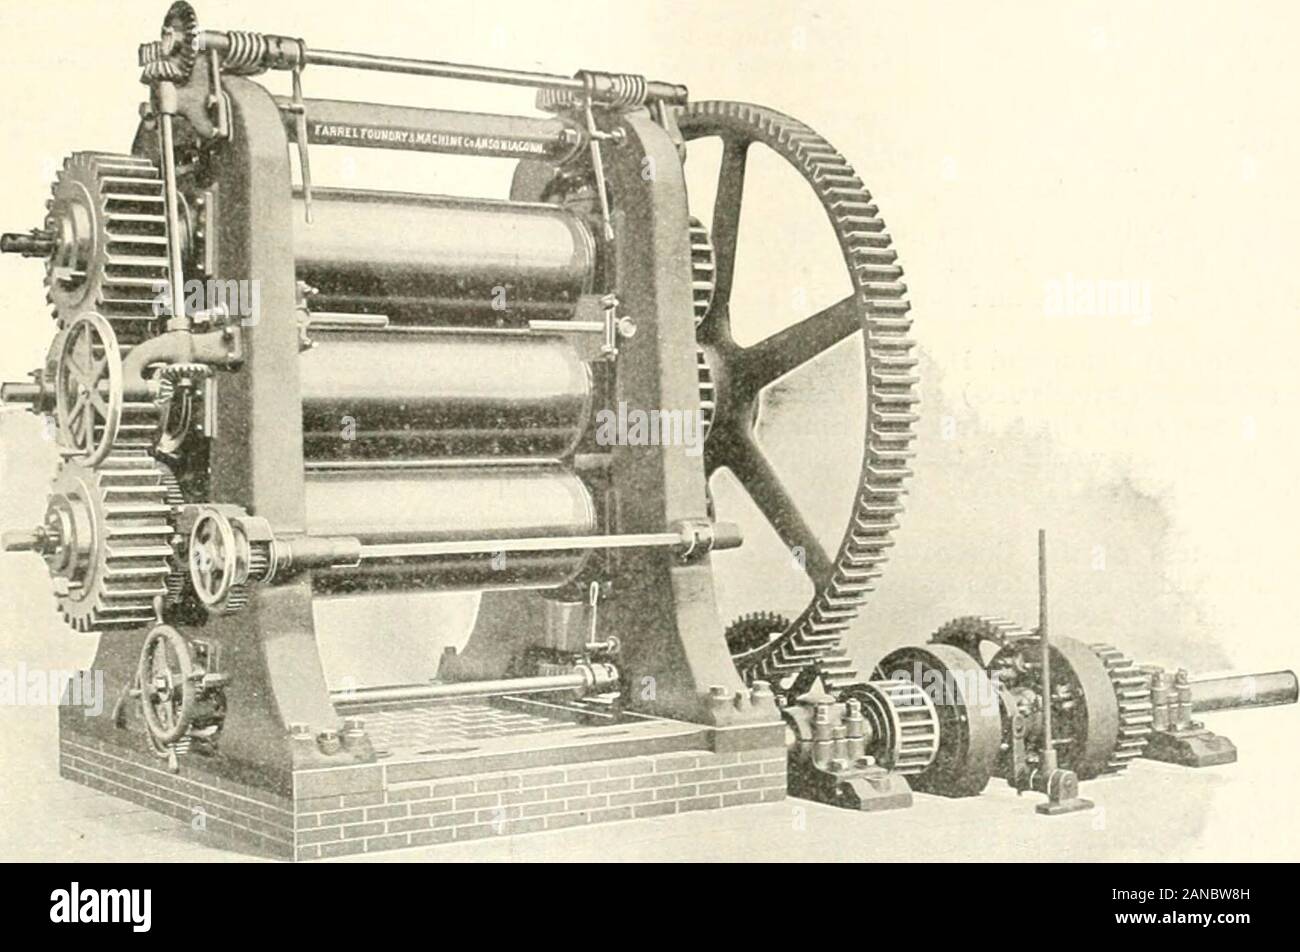 India rubber world . Steam Press ? FOR ? MECHANICAL GOODS. HYDRAULIC OR .  KNUCKLE JOINT. WRITE FOR PRICES. BOOMER X BDSCHERT PRESS CO., 336 West  Water Street, SYRACUSE, N. Y. Mention